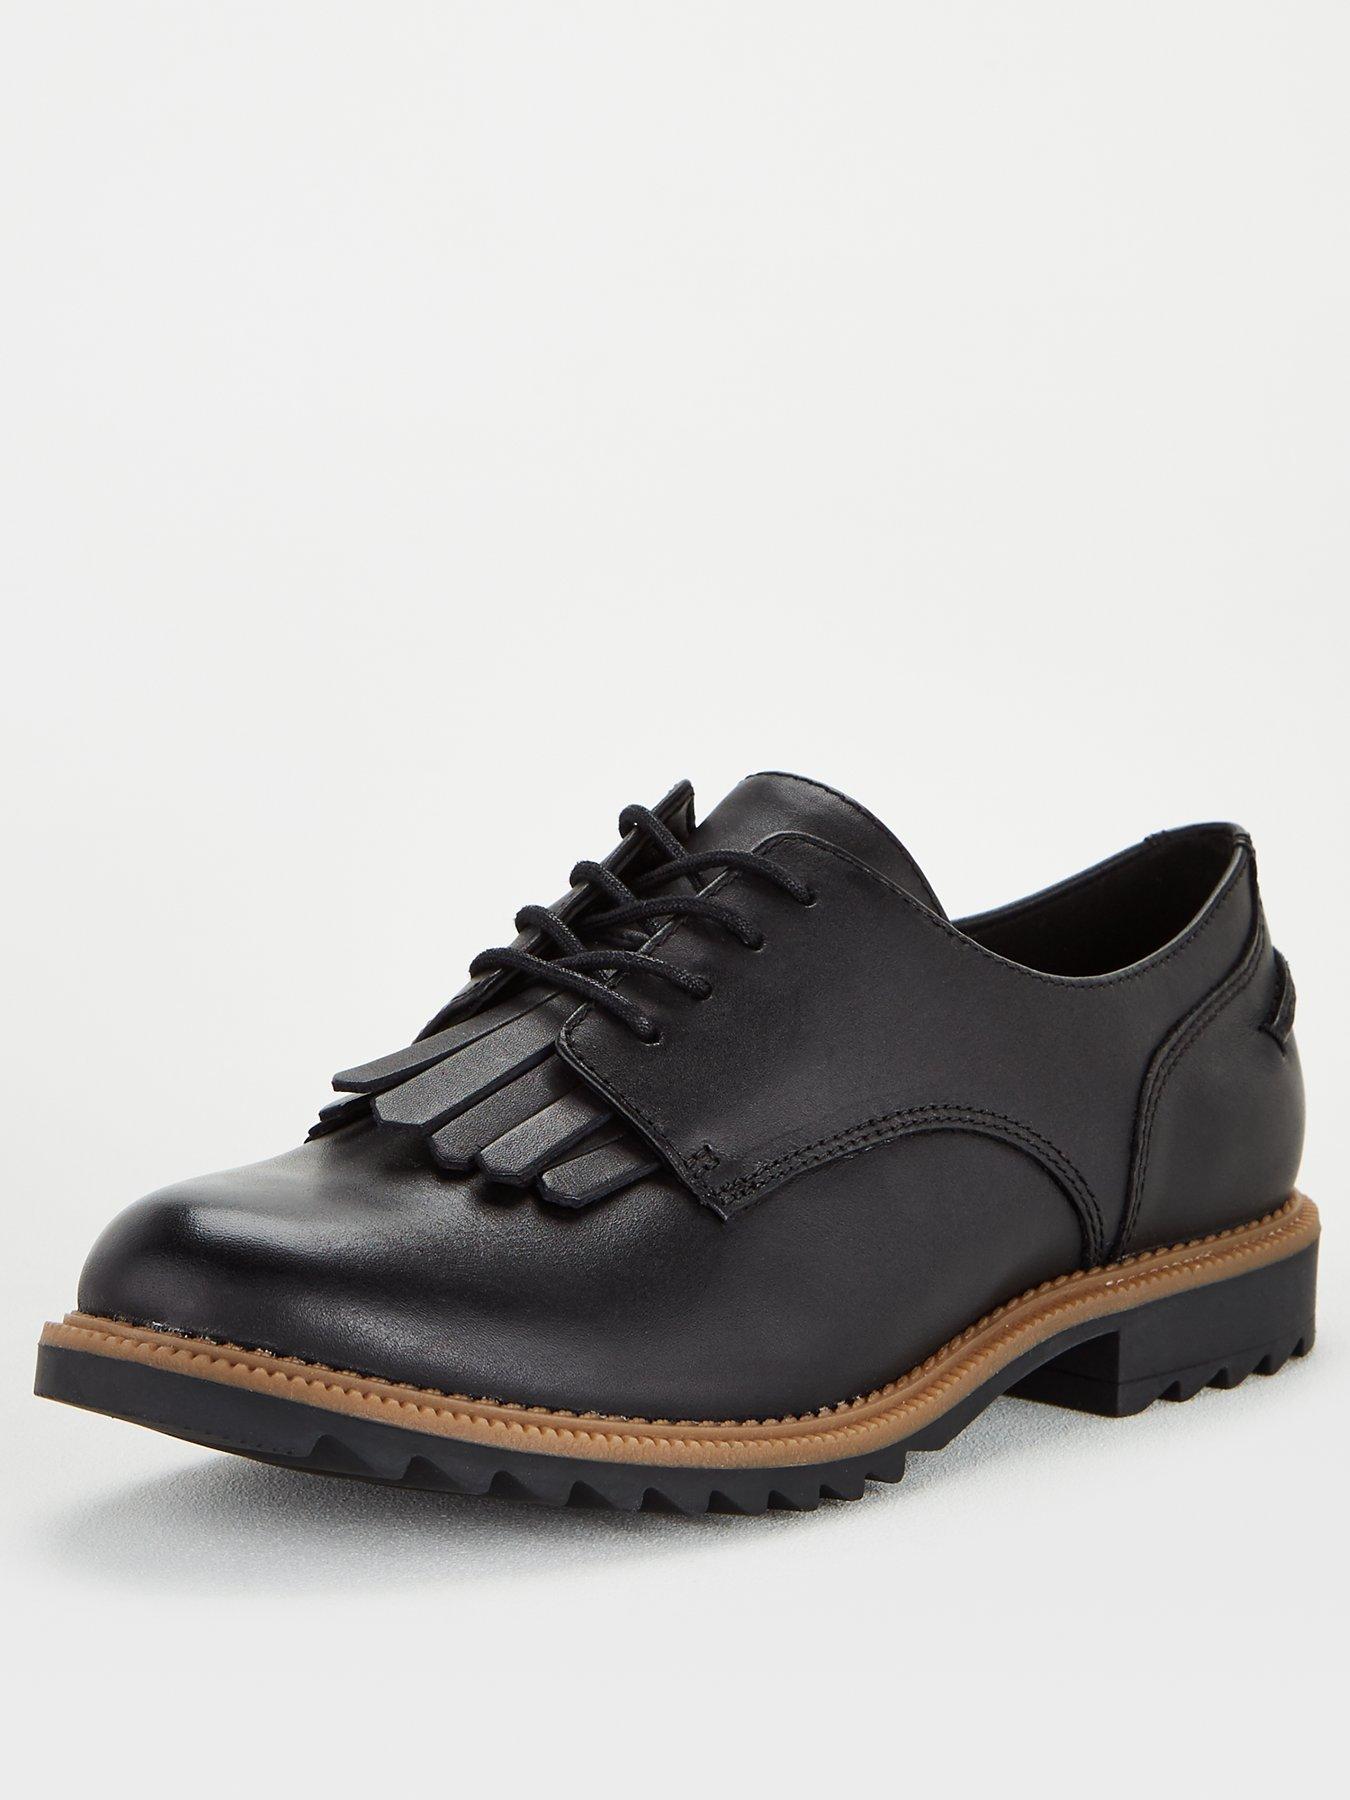 Clarks Griffin Mabel Leather Brogues 